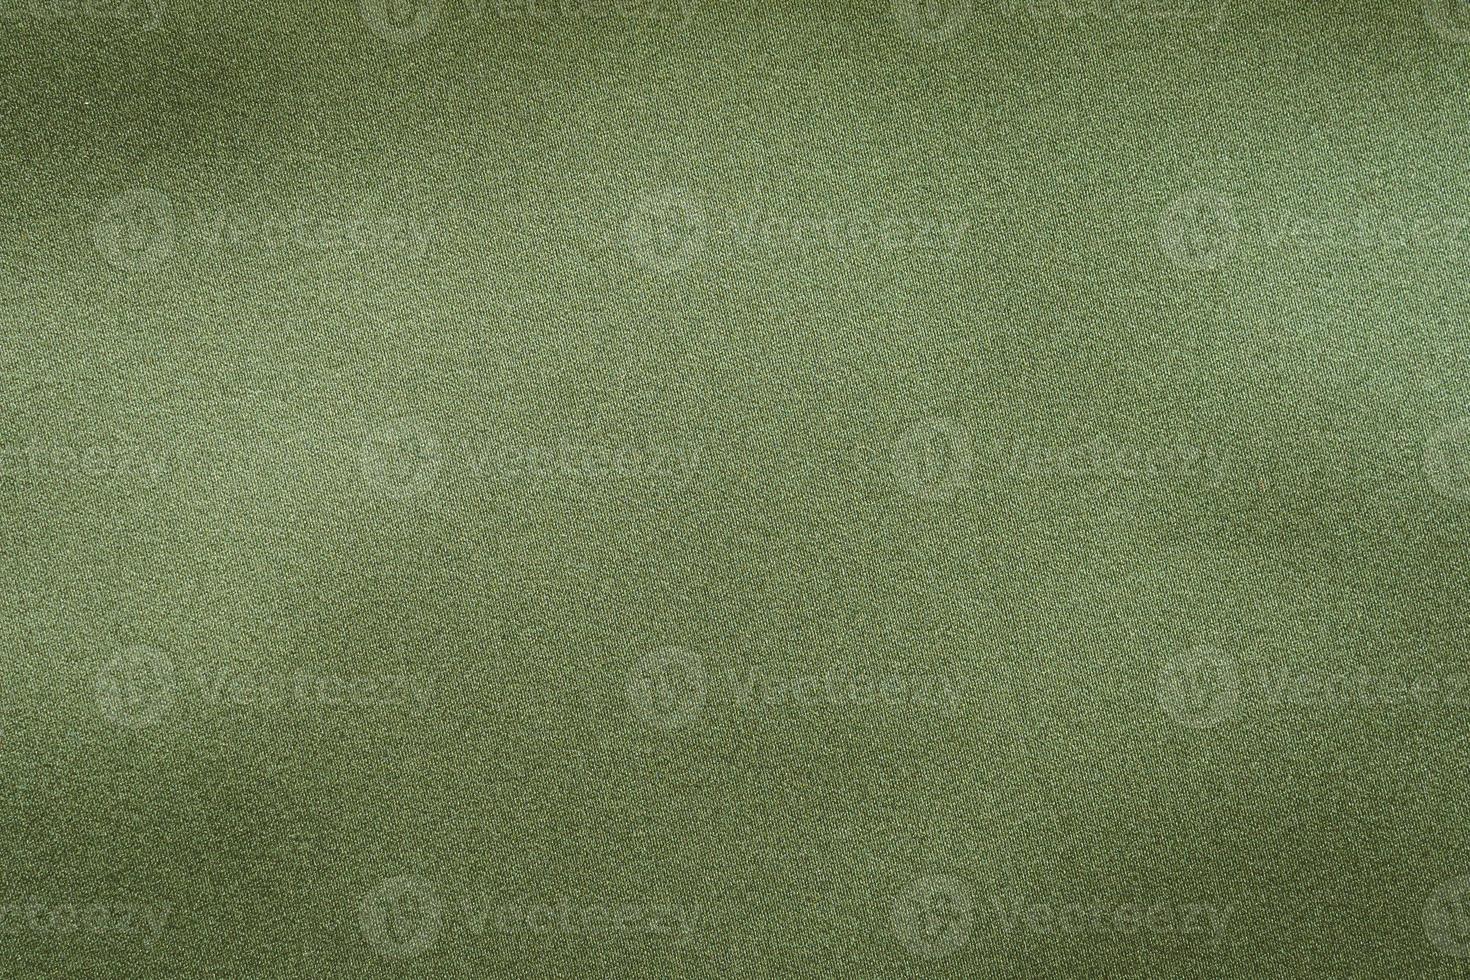 Green fabric texture background close up photo